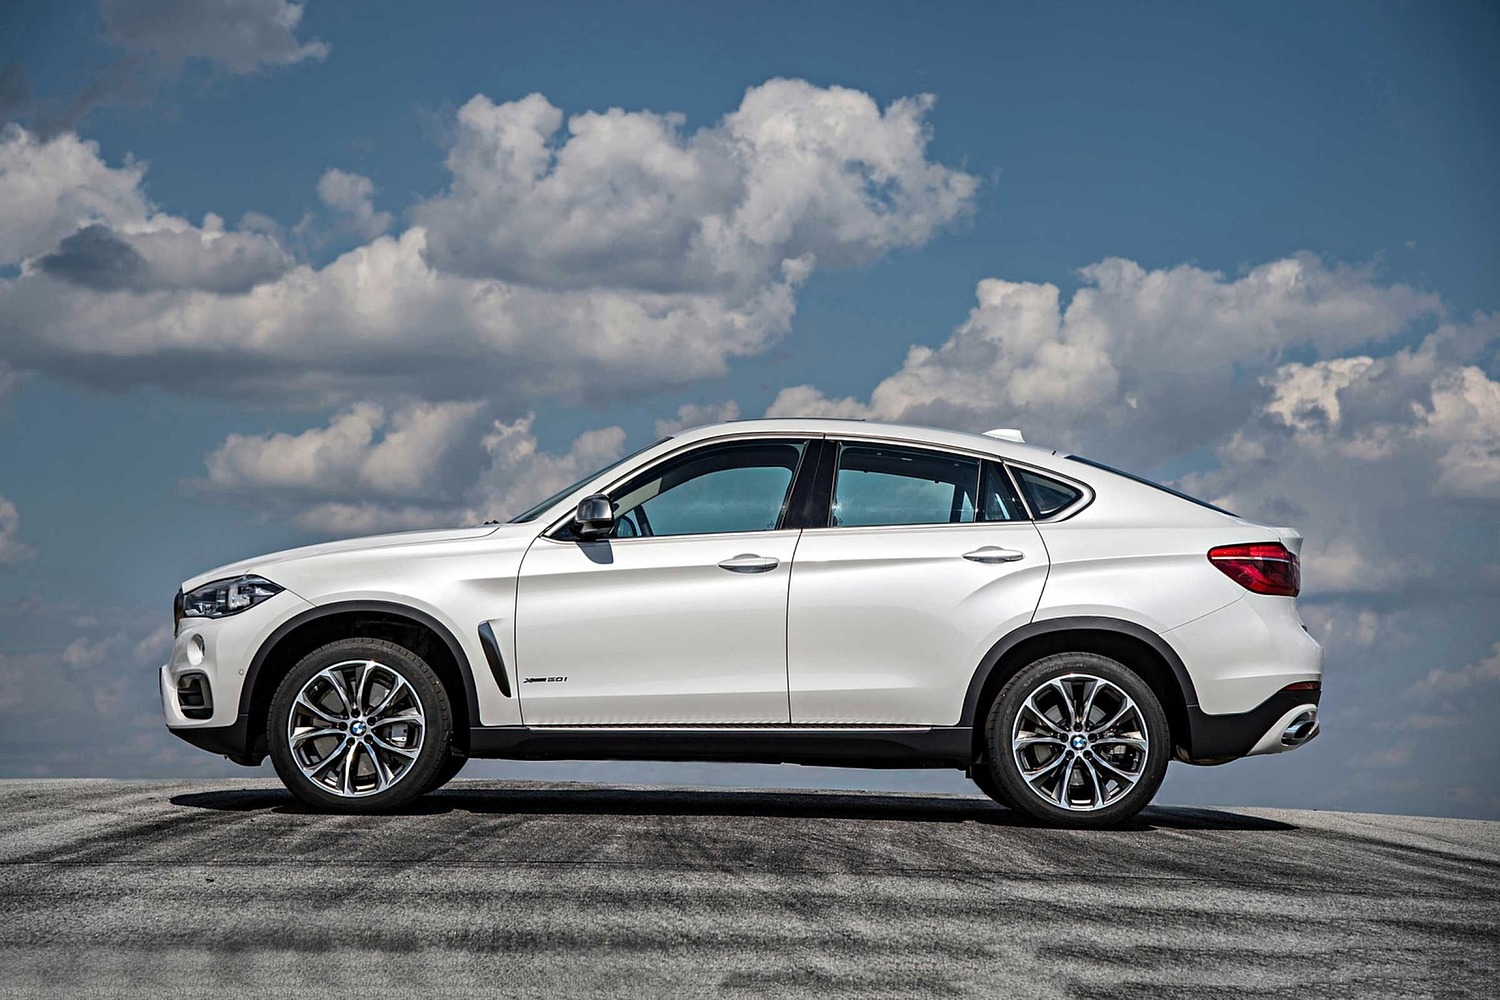 BMW X6 xDrive50i 4dr SUV Exterior (2017 model year shown)